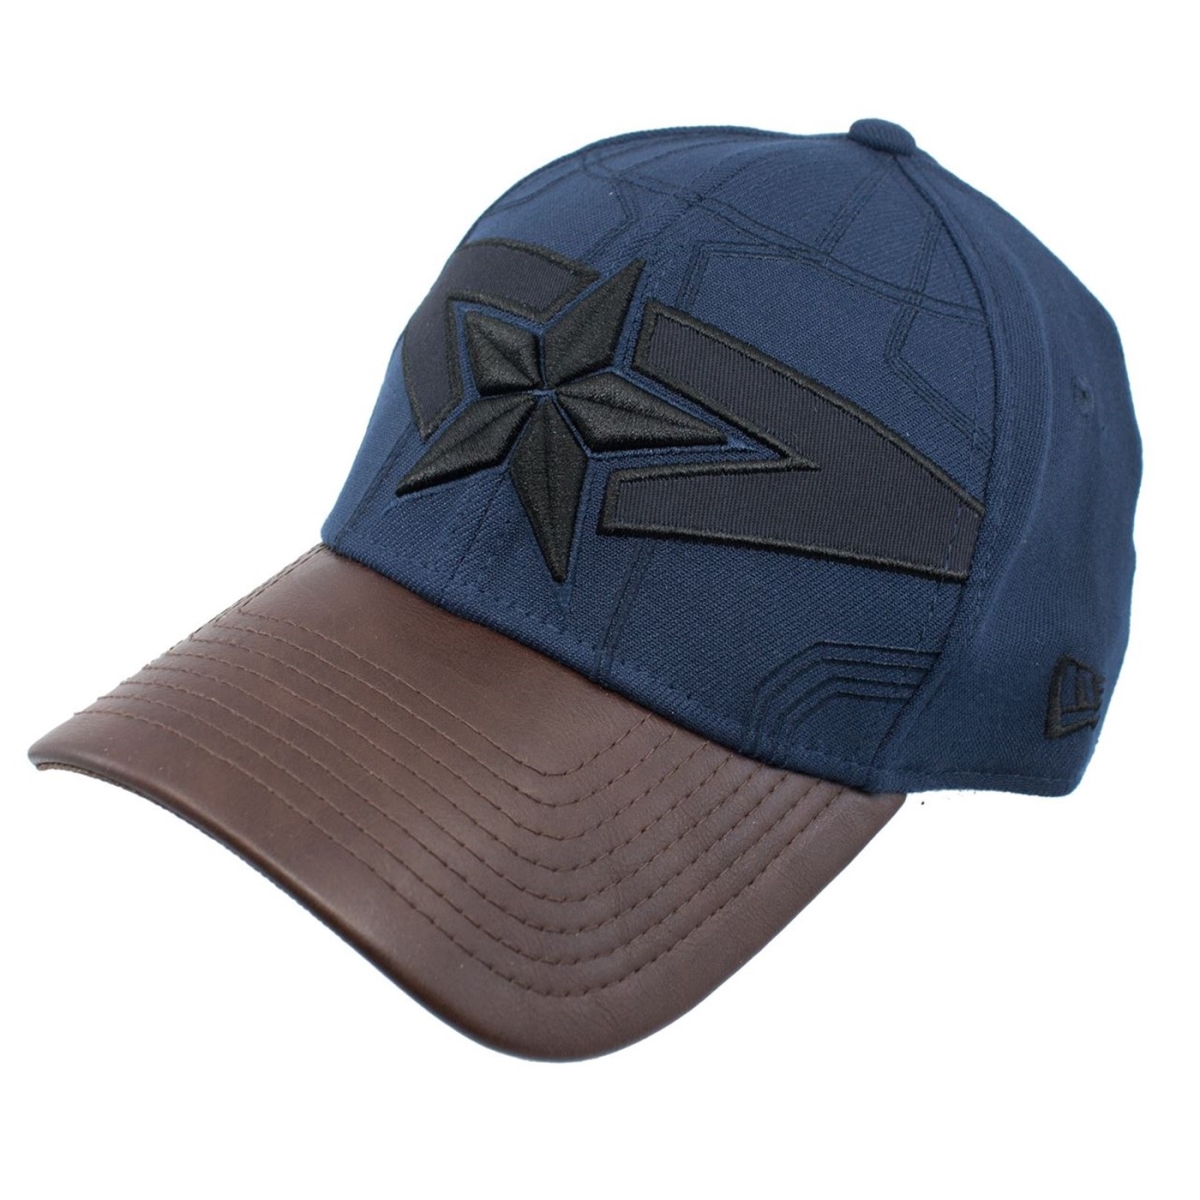 Picture of Captain America hatcapnomadarm3930-l-x-Large-XLarge Captain America Nomad Armor 39 Thirty Fitted Hat - Large & Extra Large